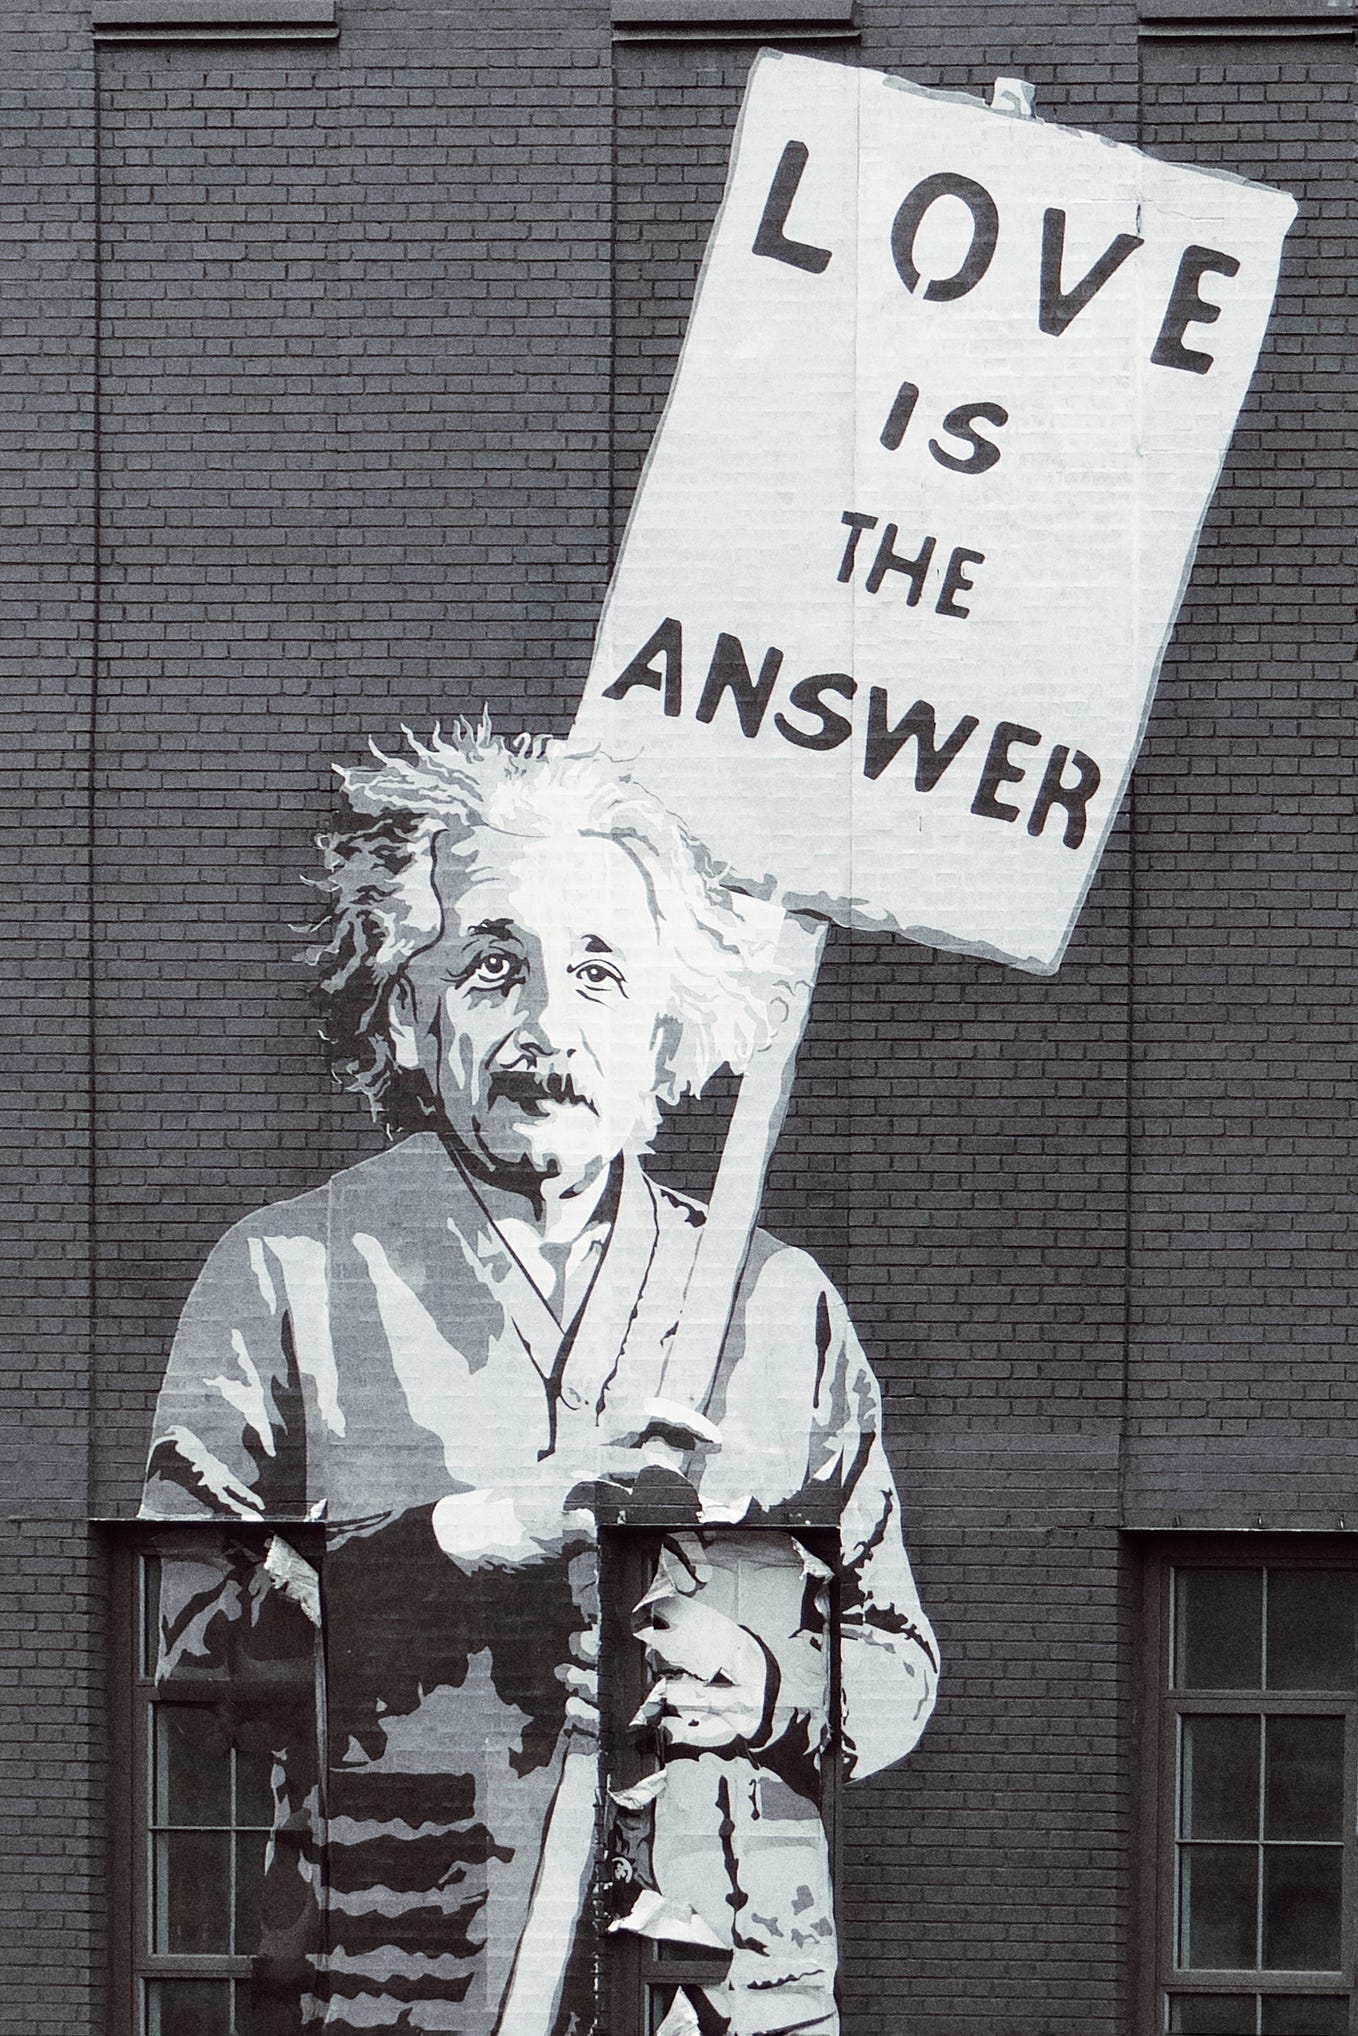 Einstein holding a sign that says “Love is the answer.”